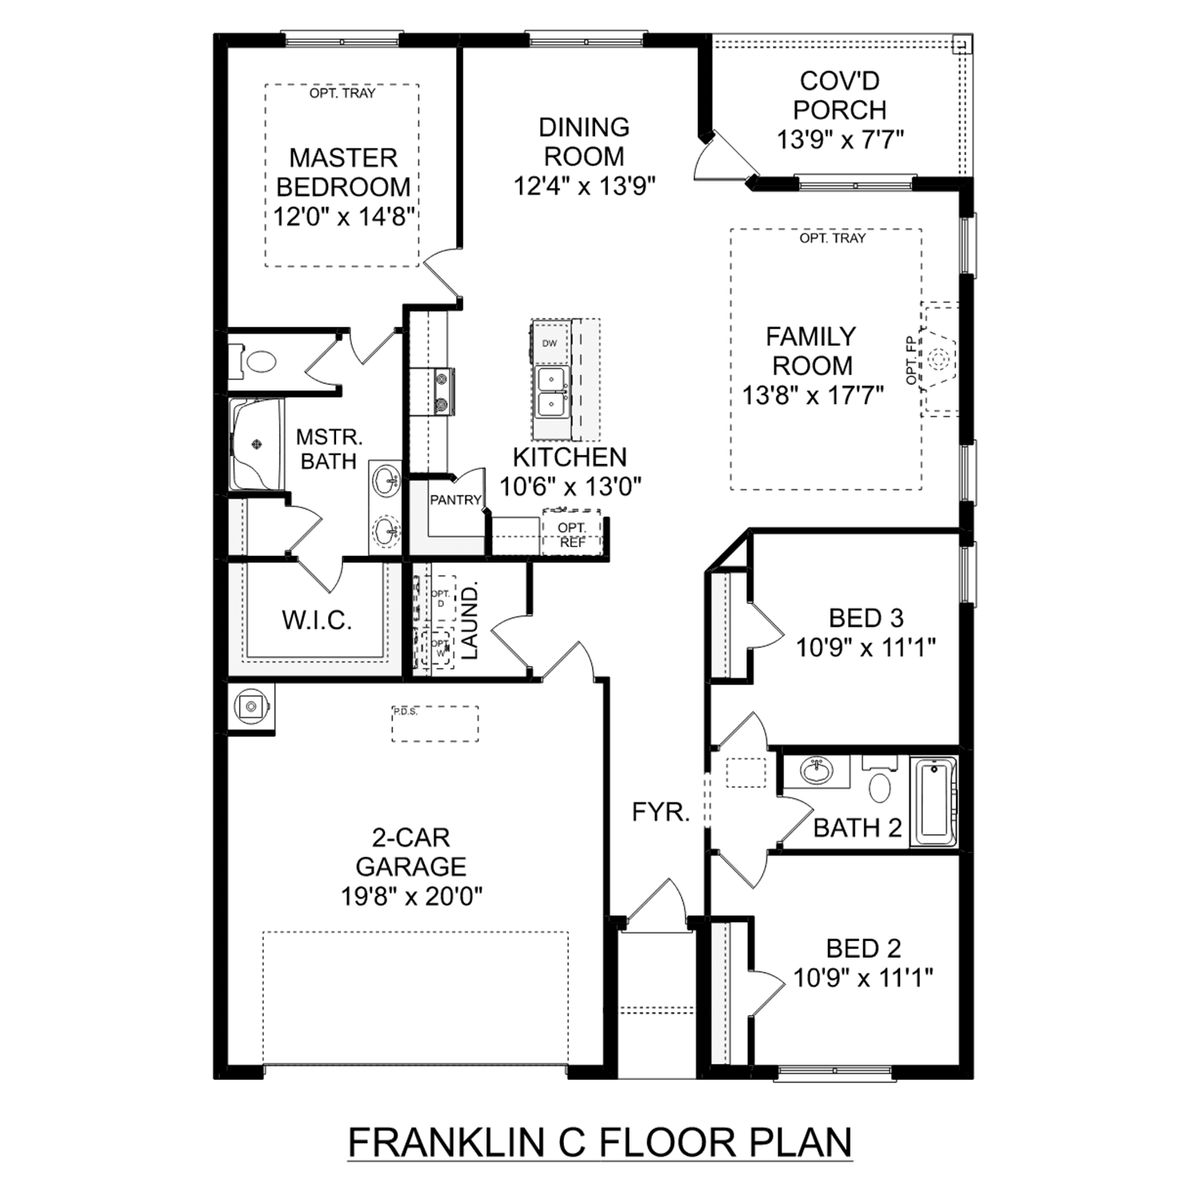 1 - The Franklin C floor plan layout for 210 Sunny Springs Court in Davidson Homes' Flint Meadows community.